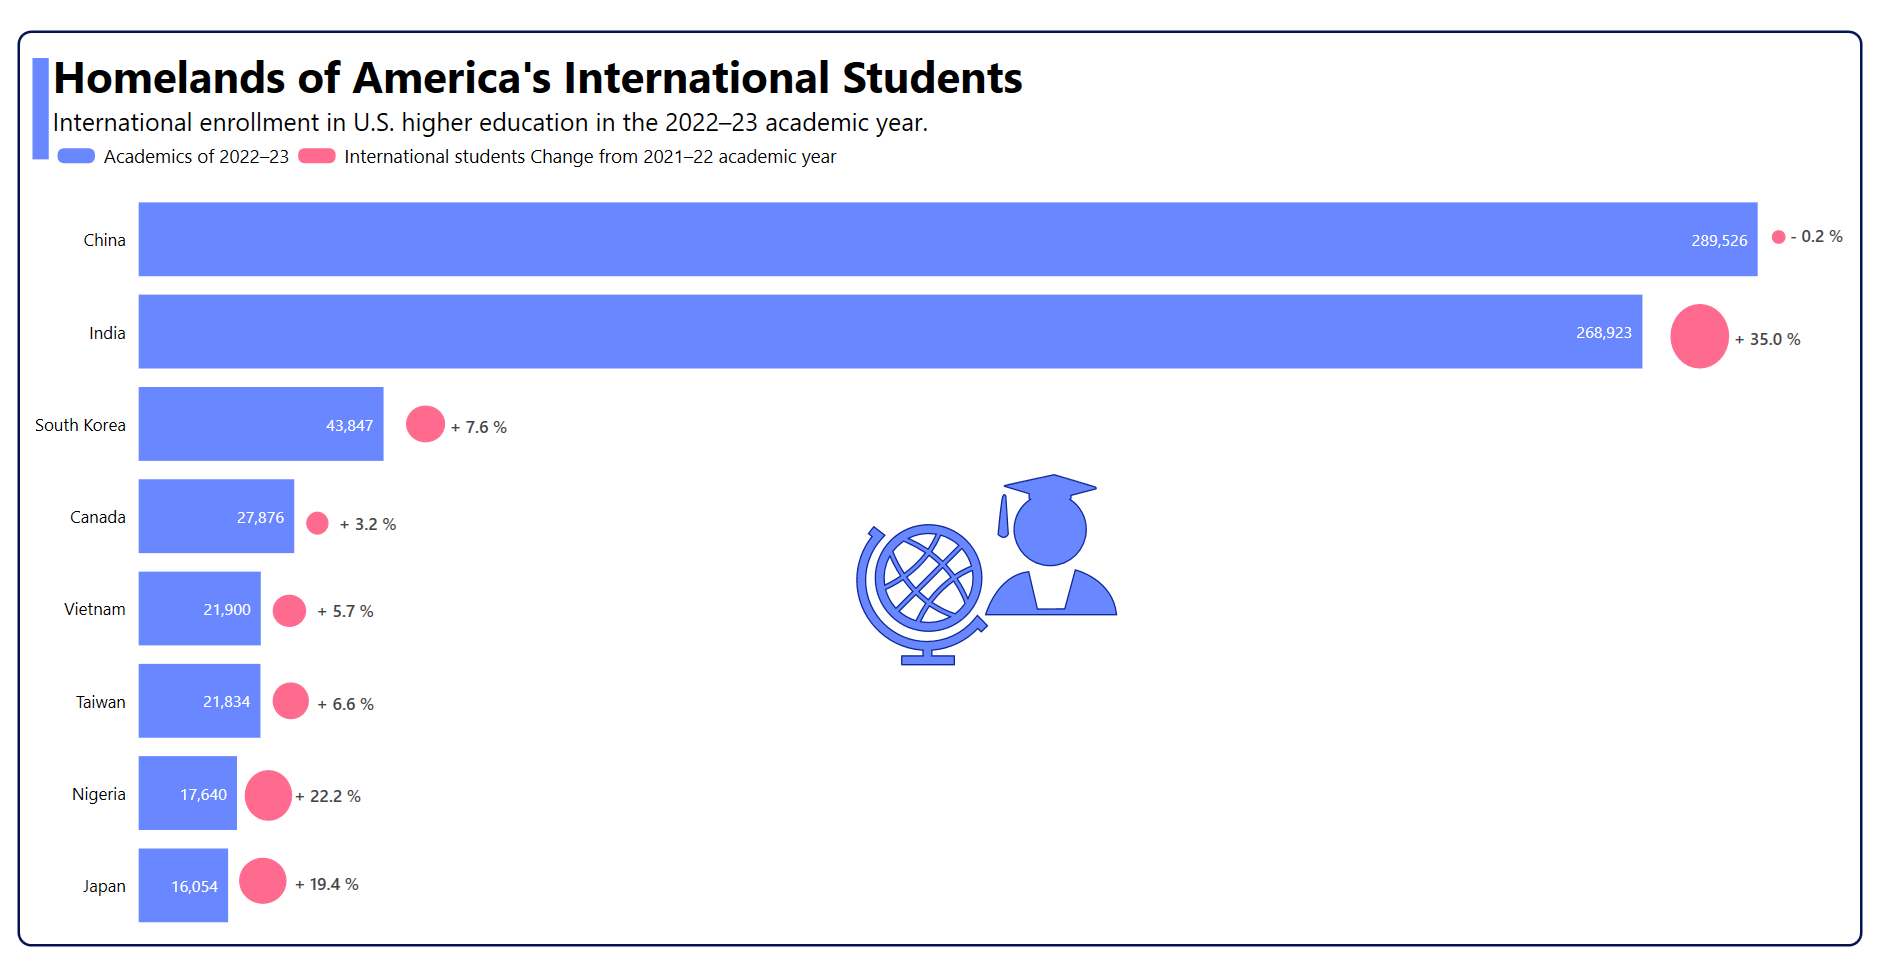 Visualization of the Homelands of America's International Students with the WPF Bar Chart